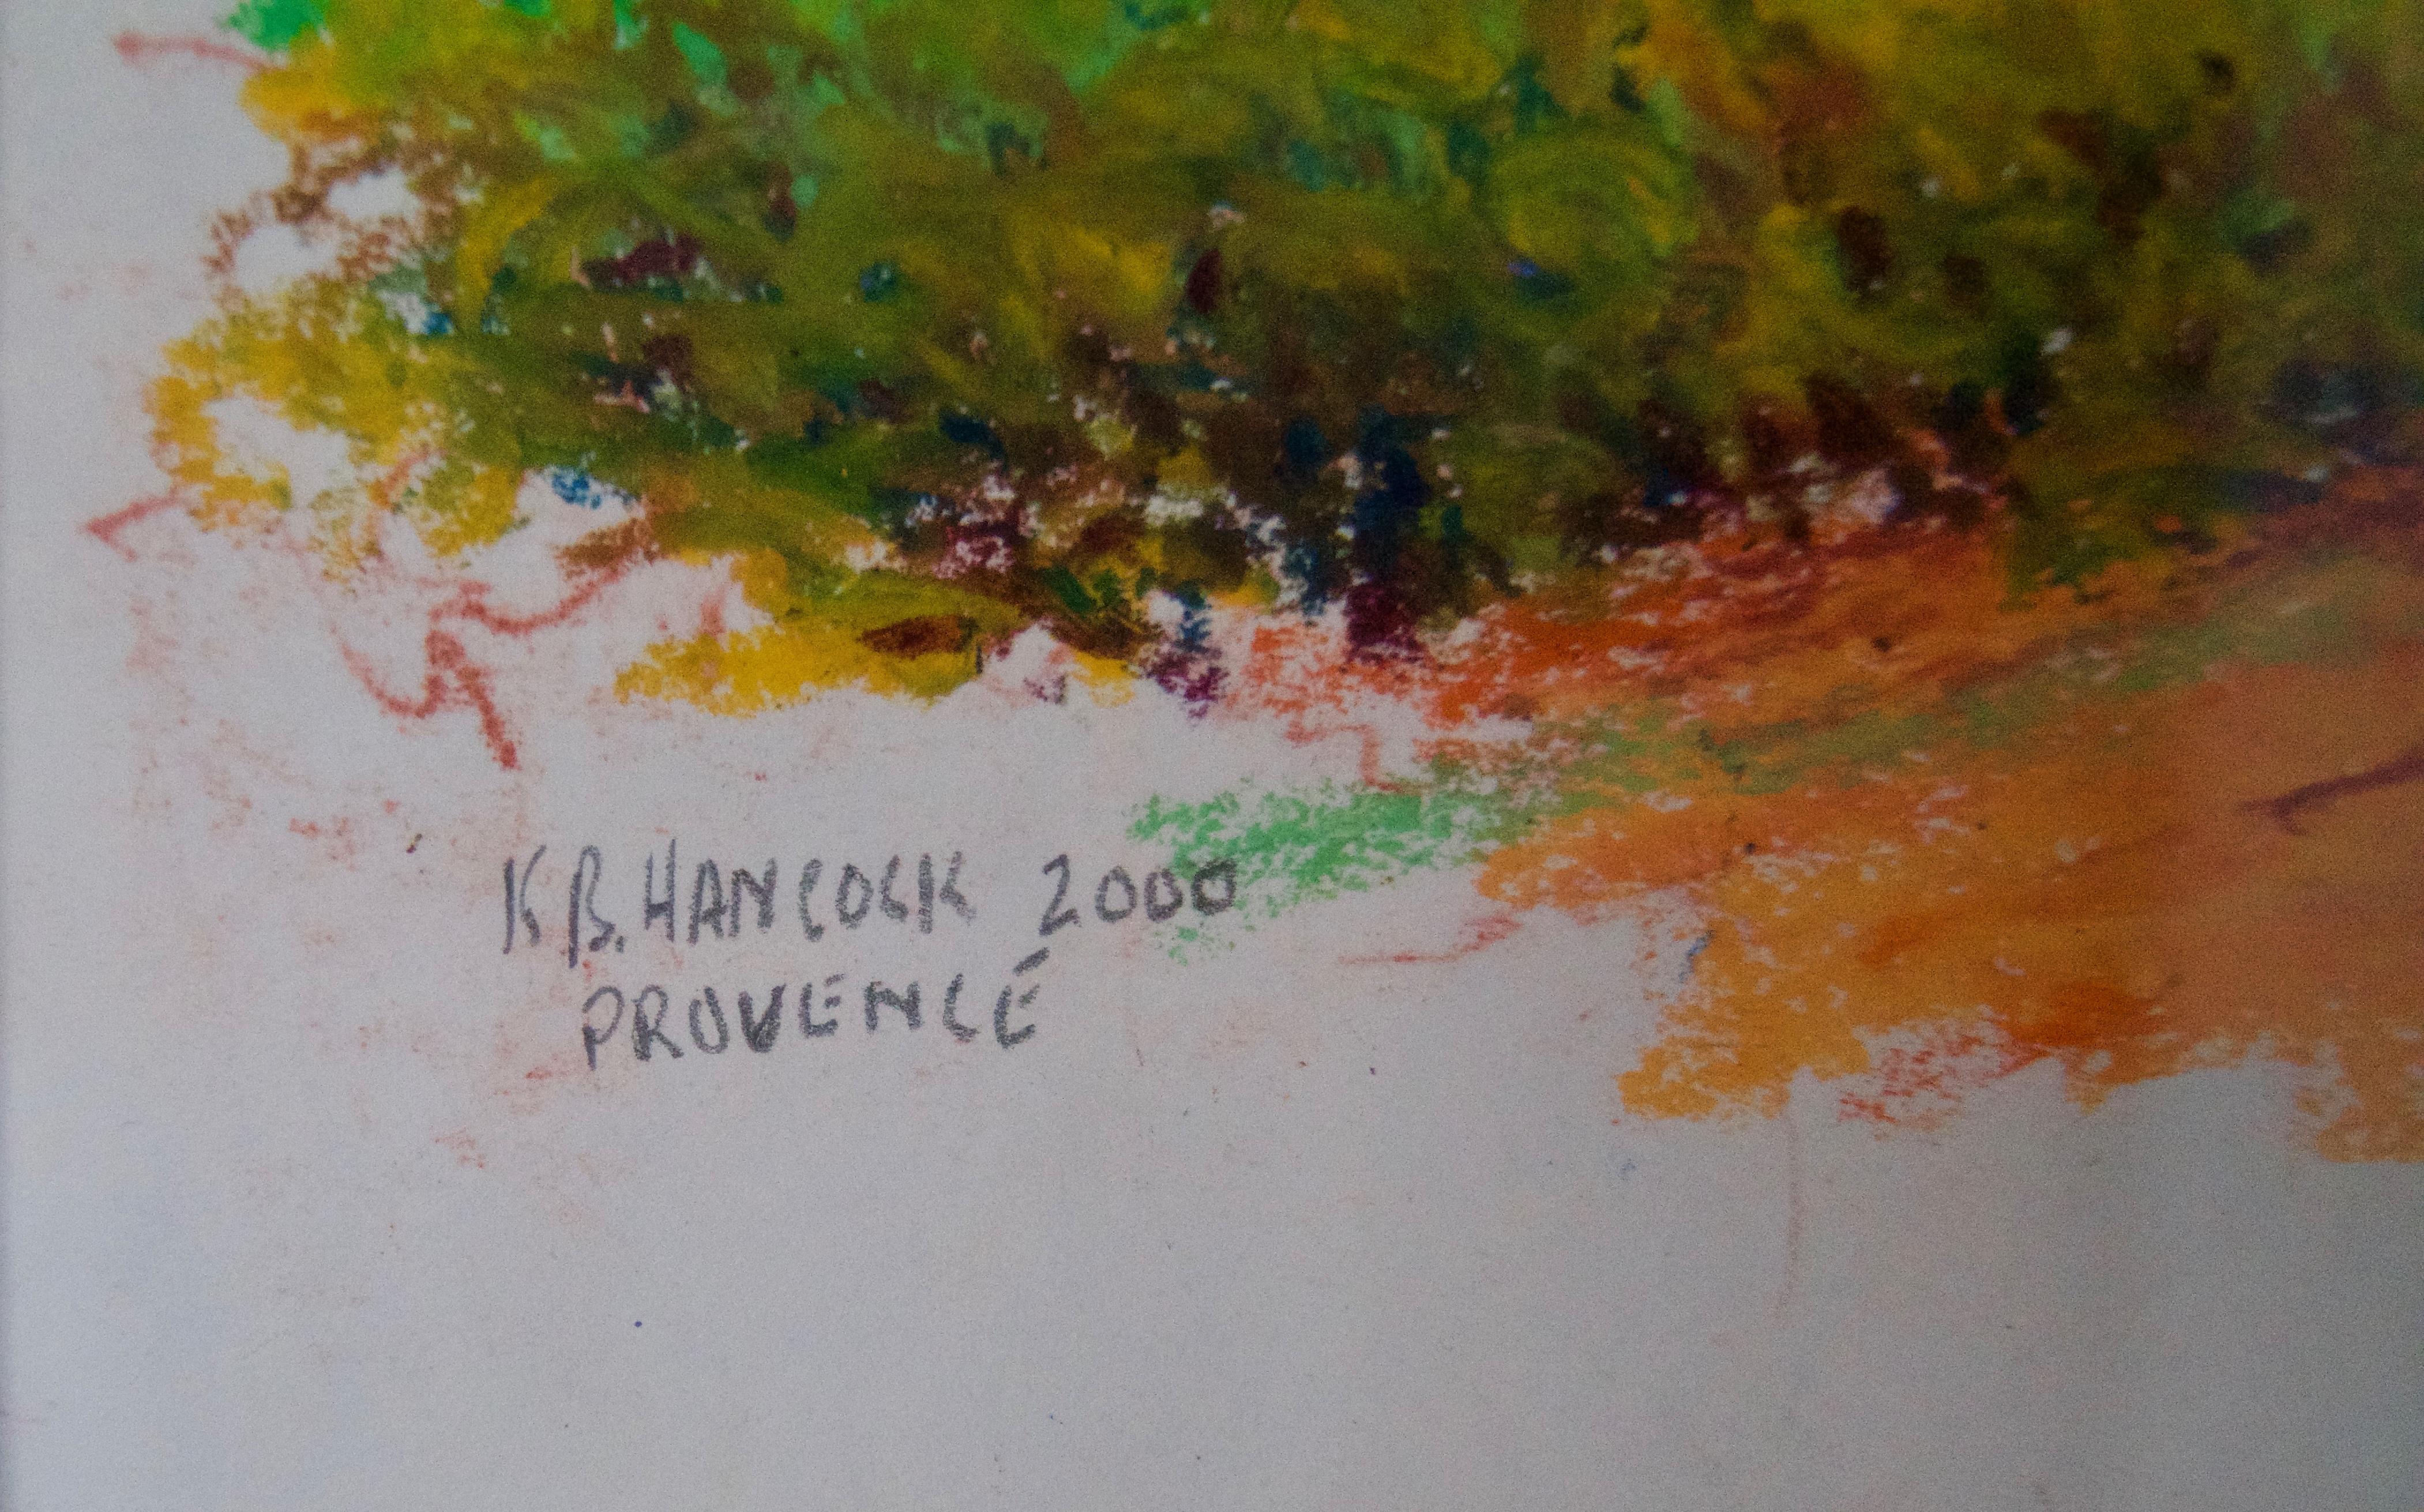 Provence South of France - Early 21st Century Landscape Oil Pastel by Hancock - Post-Impressionist Painting by K.B. Hancock